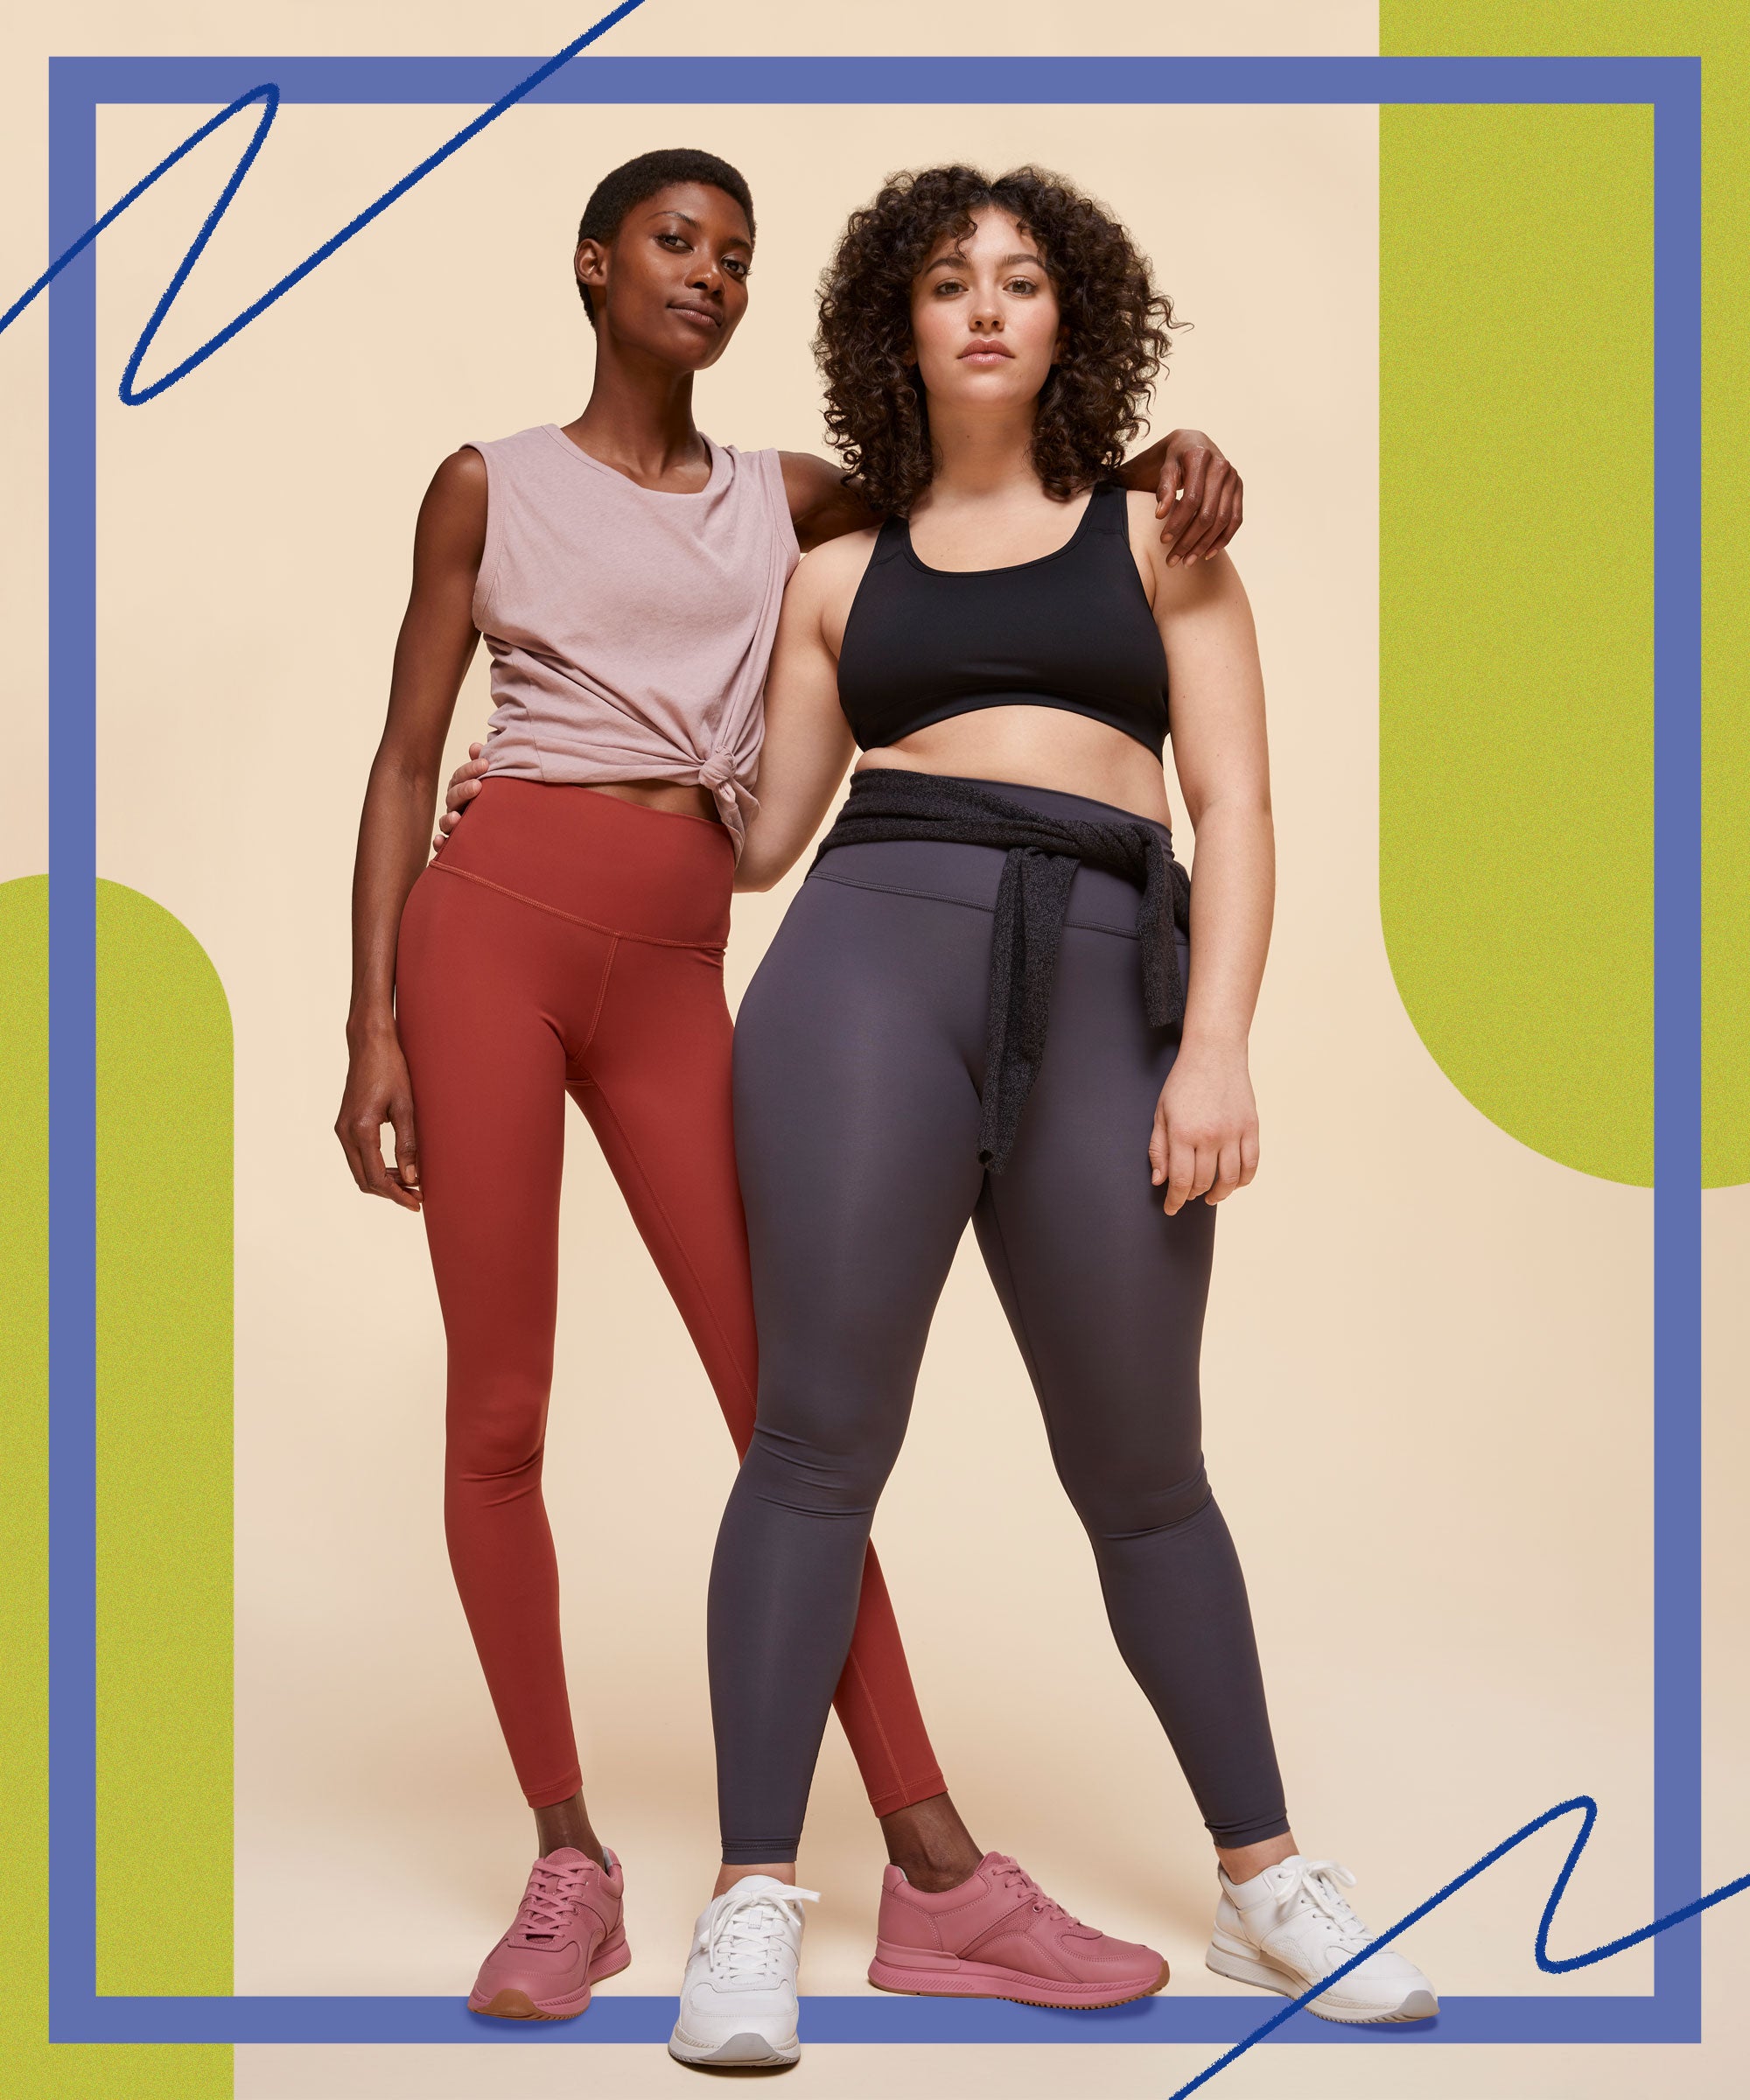 Amazon Fashion Activewear Try-On and Review